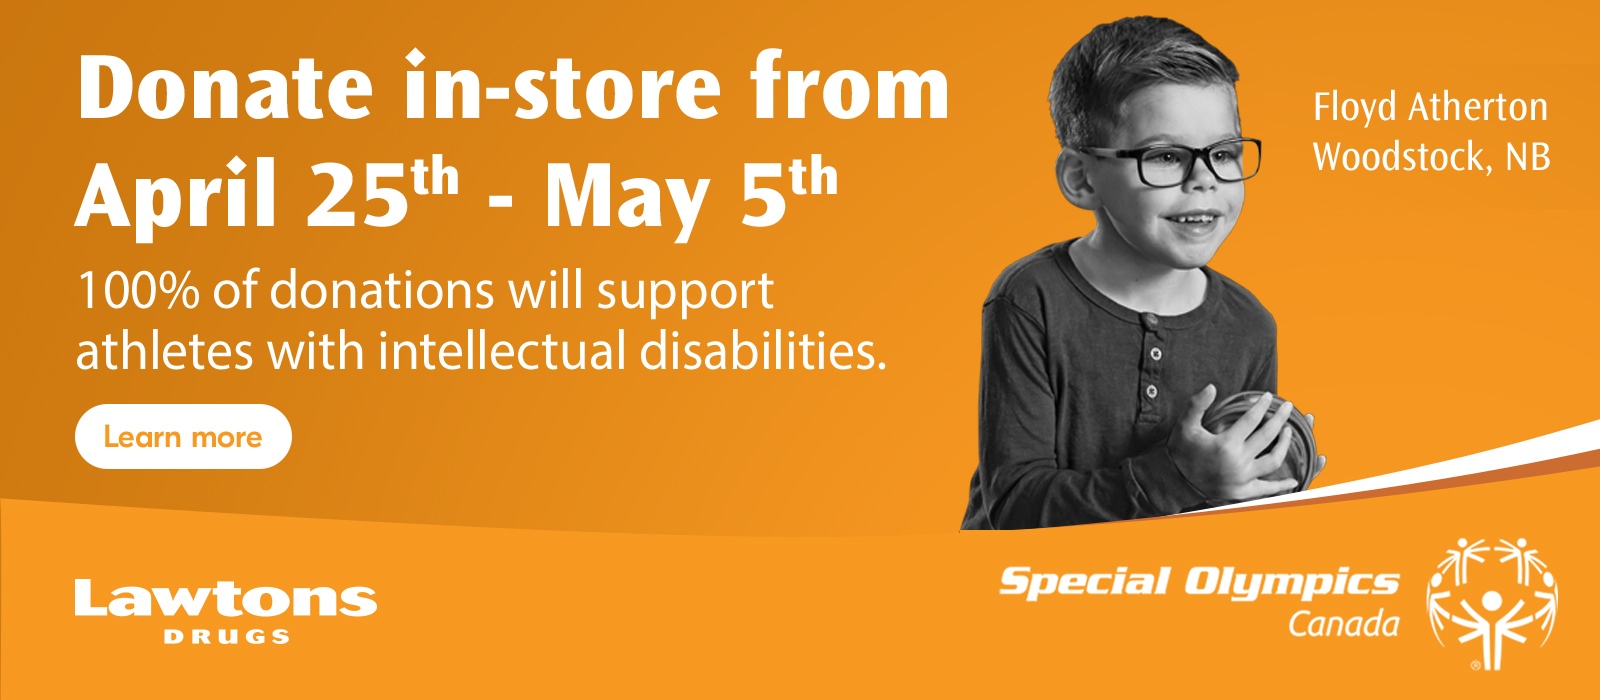 Donate in store April 25th - May 5th to support athletes with intellectual disabilities in our community.